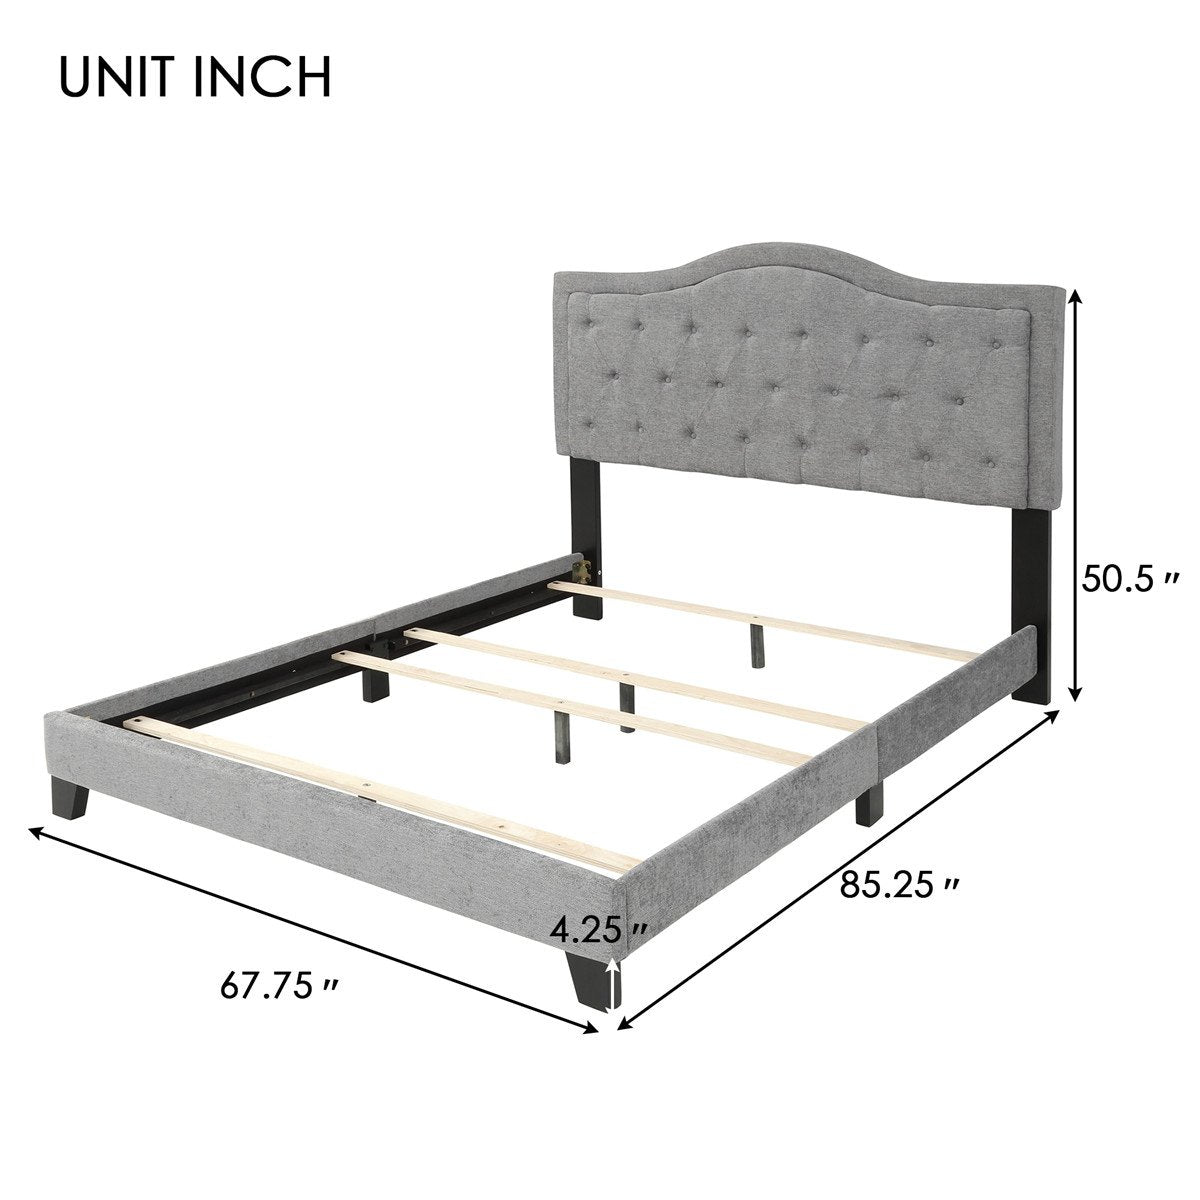 Classic style Upholstered Linen Bed Frame | Queen